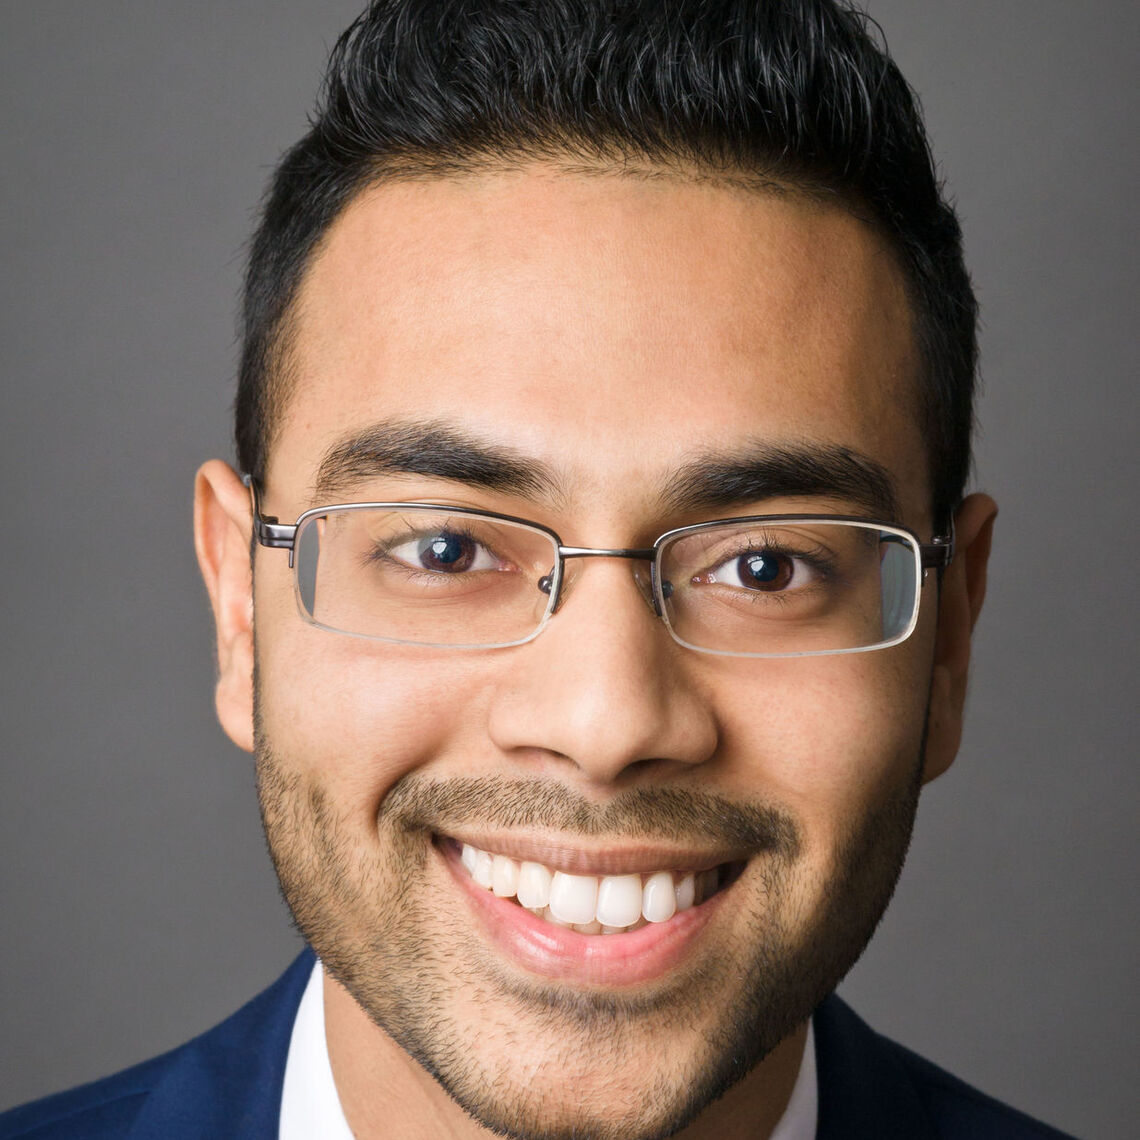 F&M alumnus and current trustee Akbar Hossain '13 was recently named the executive director of the Shapiro transition team and served as the policy director for the governor-elect's gubernatorial campaign.